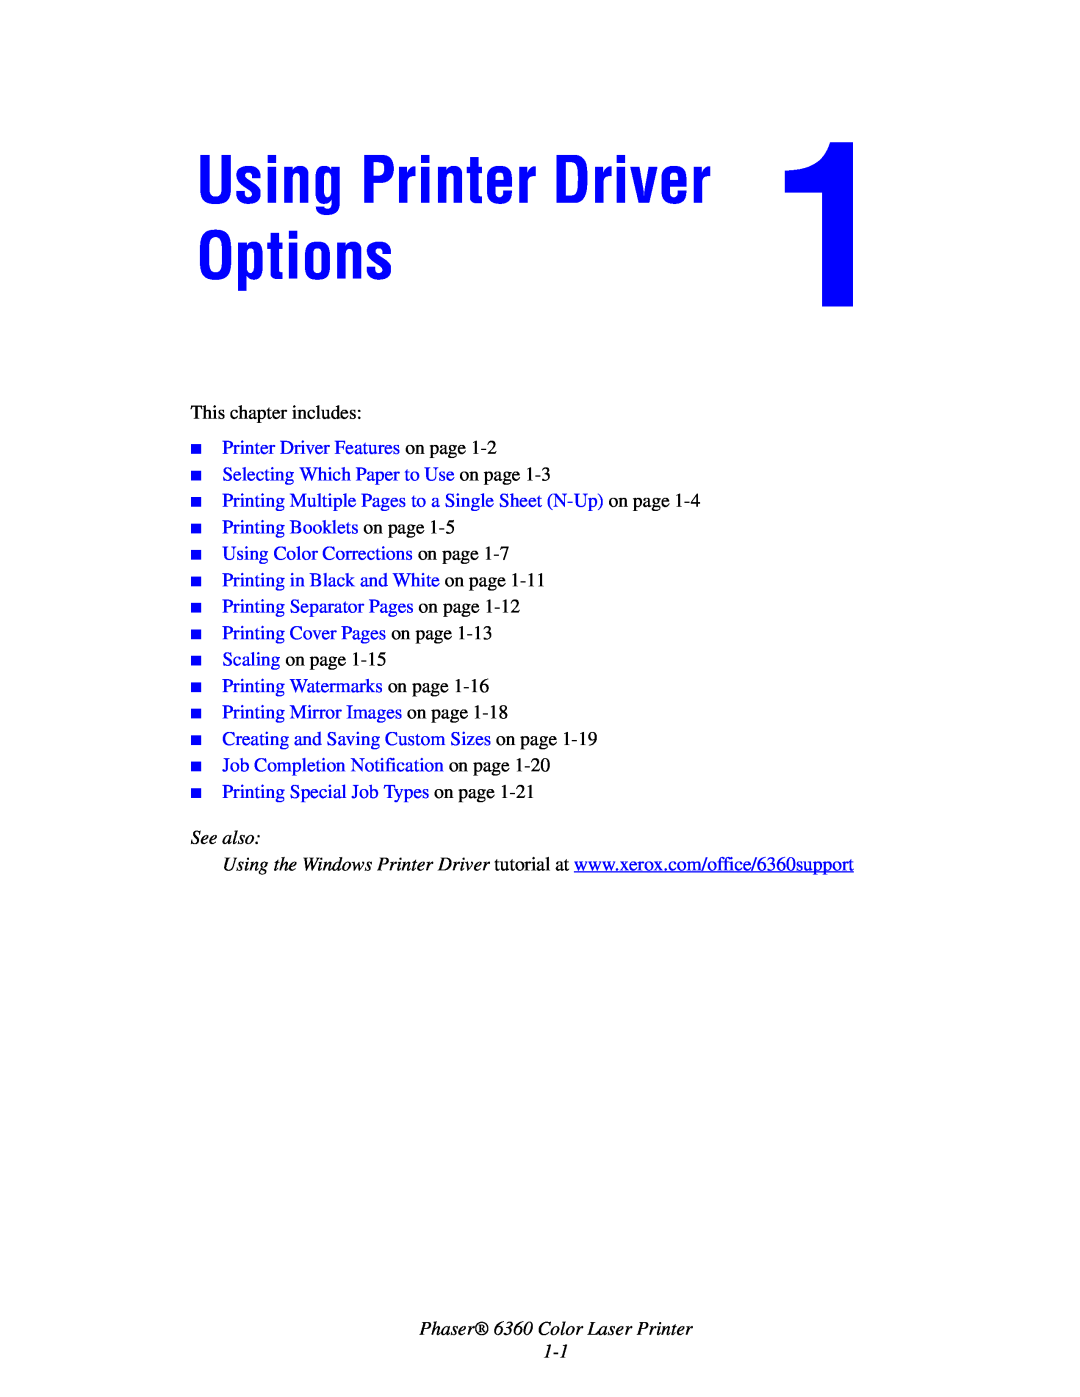 Xerox 6360 Using Printer Driver Options, Printer Driver Features on page, Selecting Which Paper to Use on page, See also 